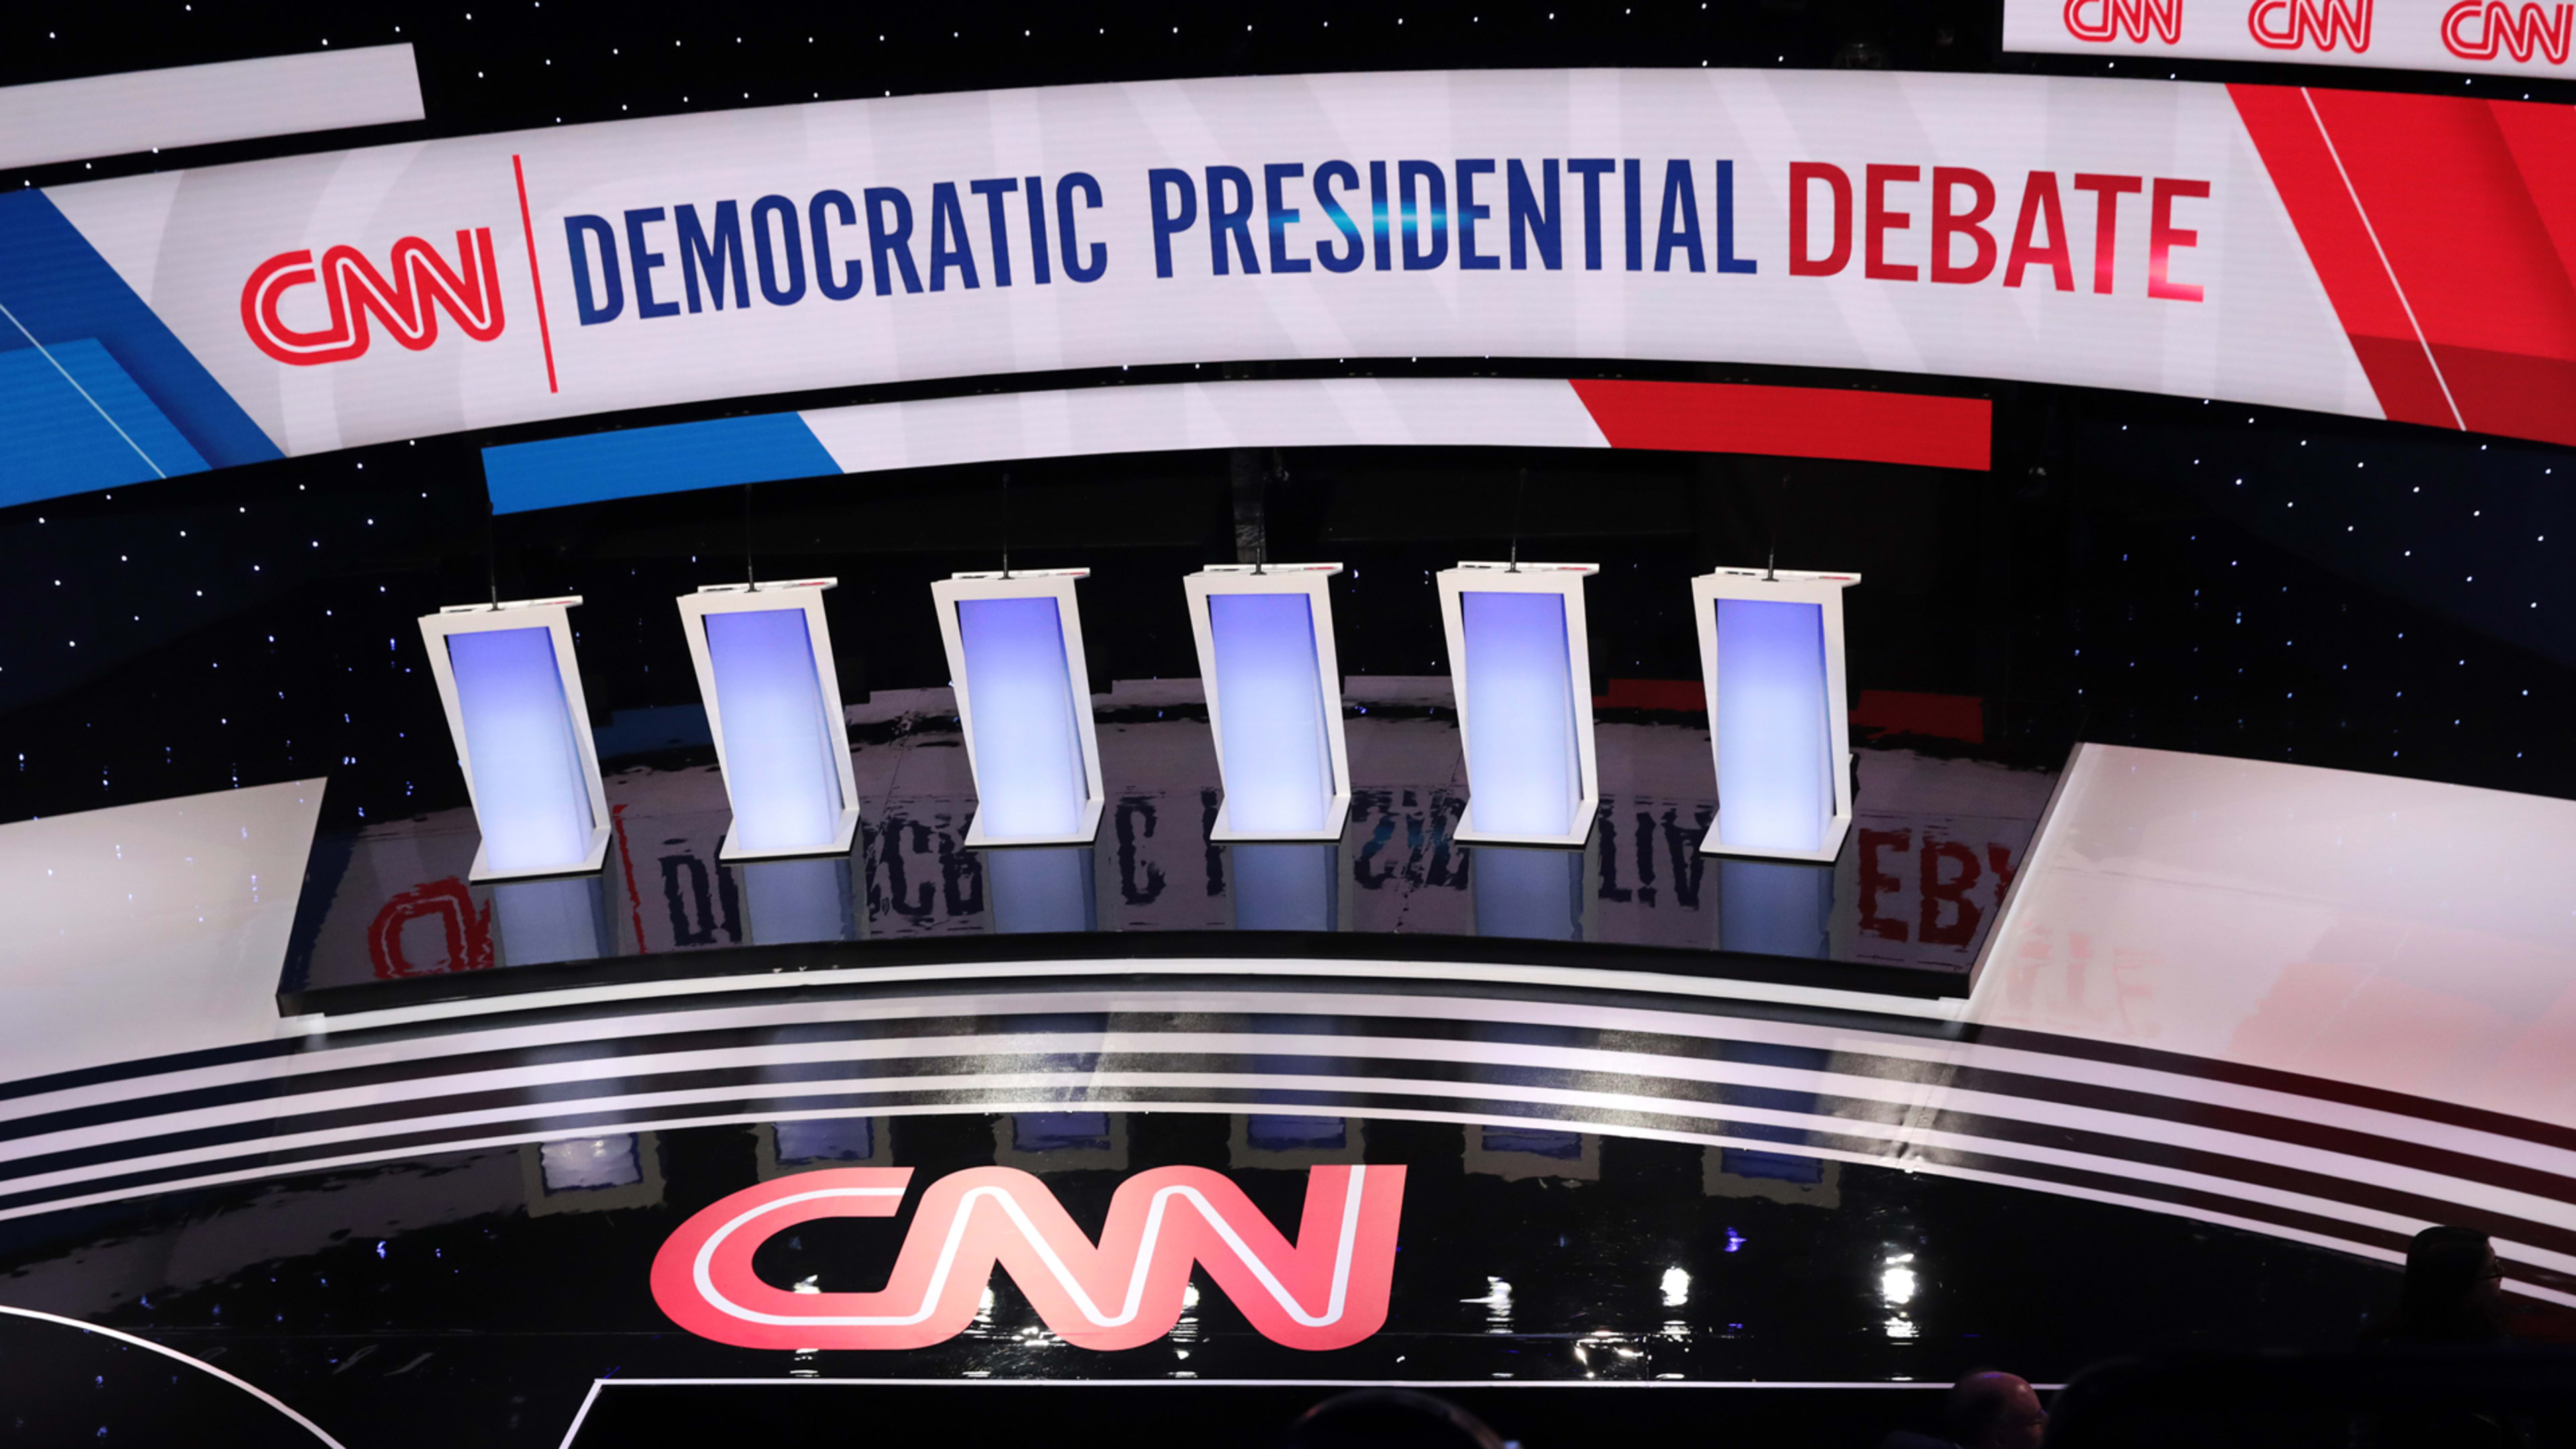 How to watch the CNN Democratic debate live without cable for free